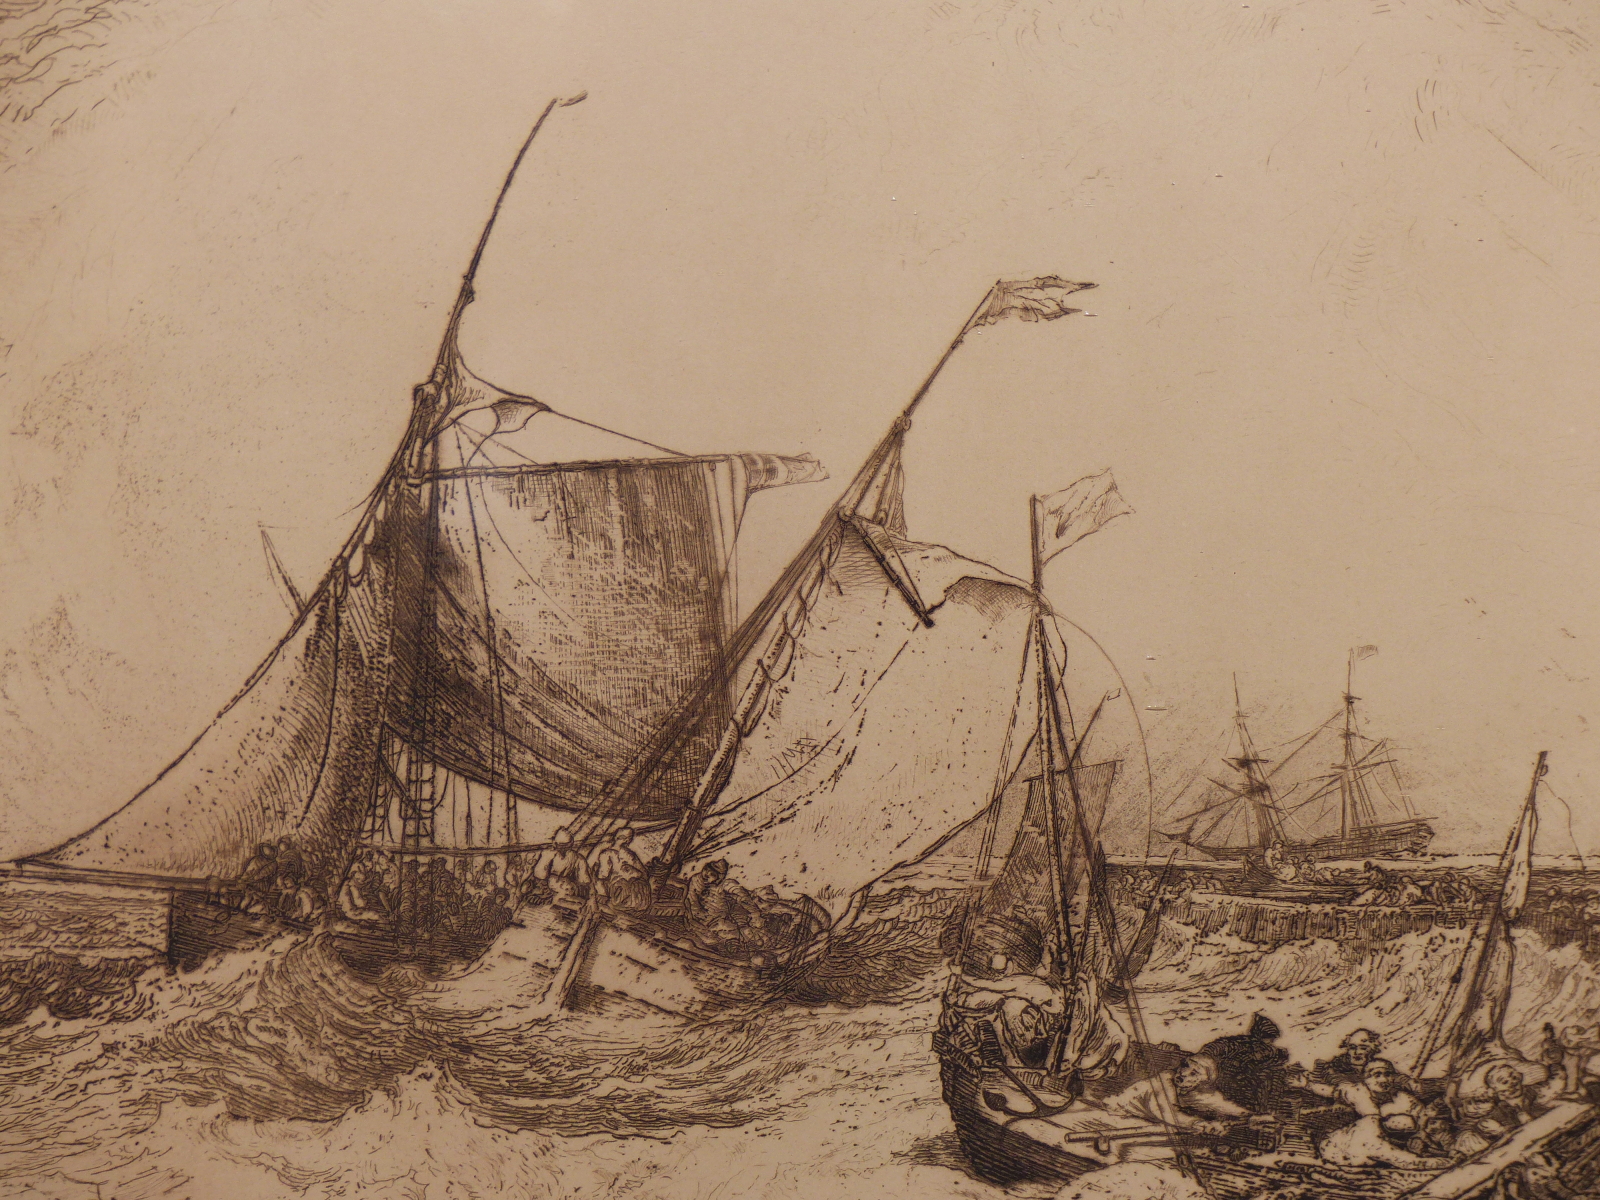 FRANCIS SEYMOUR HADEN AFTER J.M.W. TURNER, CALAIS PIER, SIGNED IN PENCIL, ETCHING, 84 x 60cms pl. - Image 3 of 7